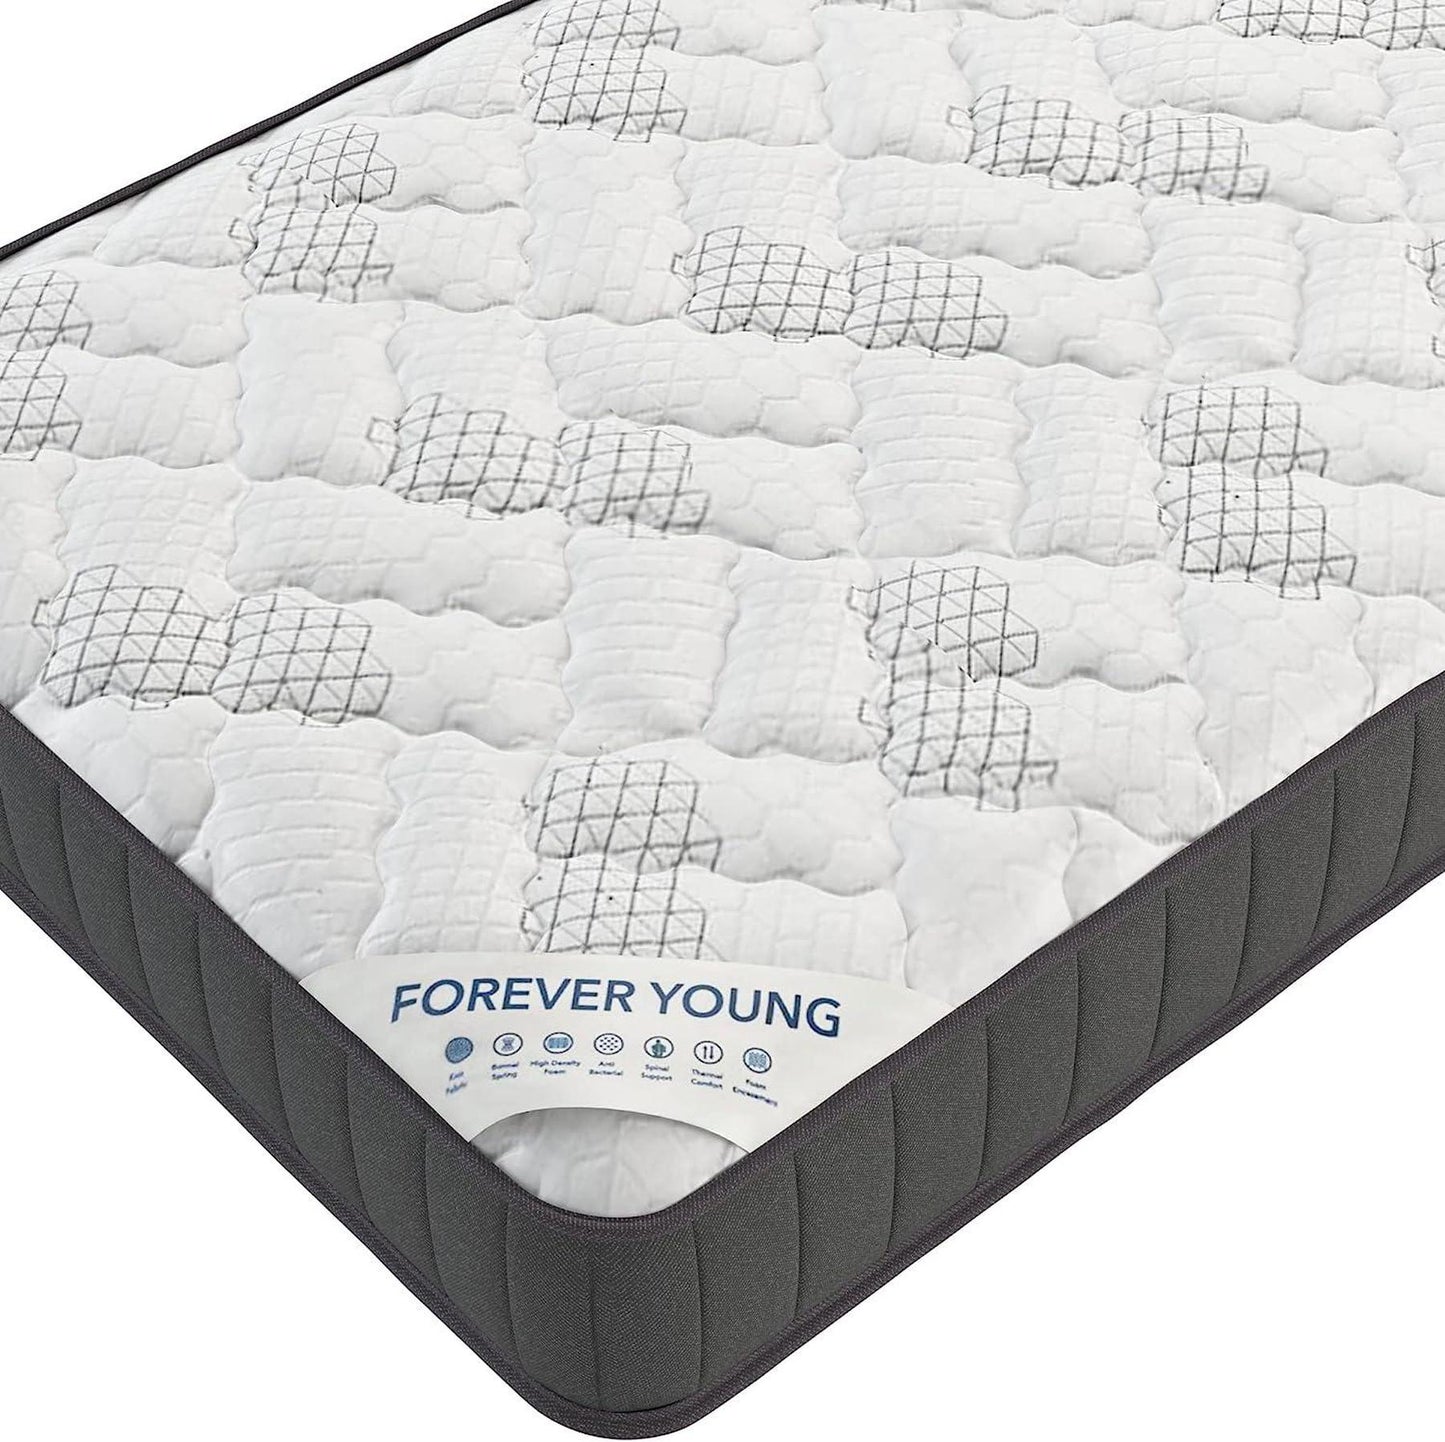 Twin , 9 inch , Firm , Hybrid Mattress with Bonnell Coil core from Bonelli Essentials by Ottomanson  in white background close up look.